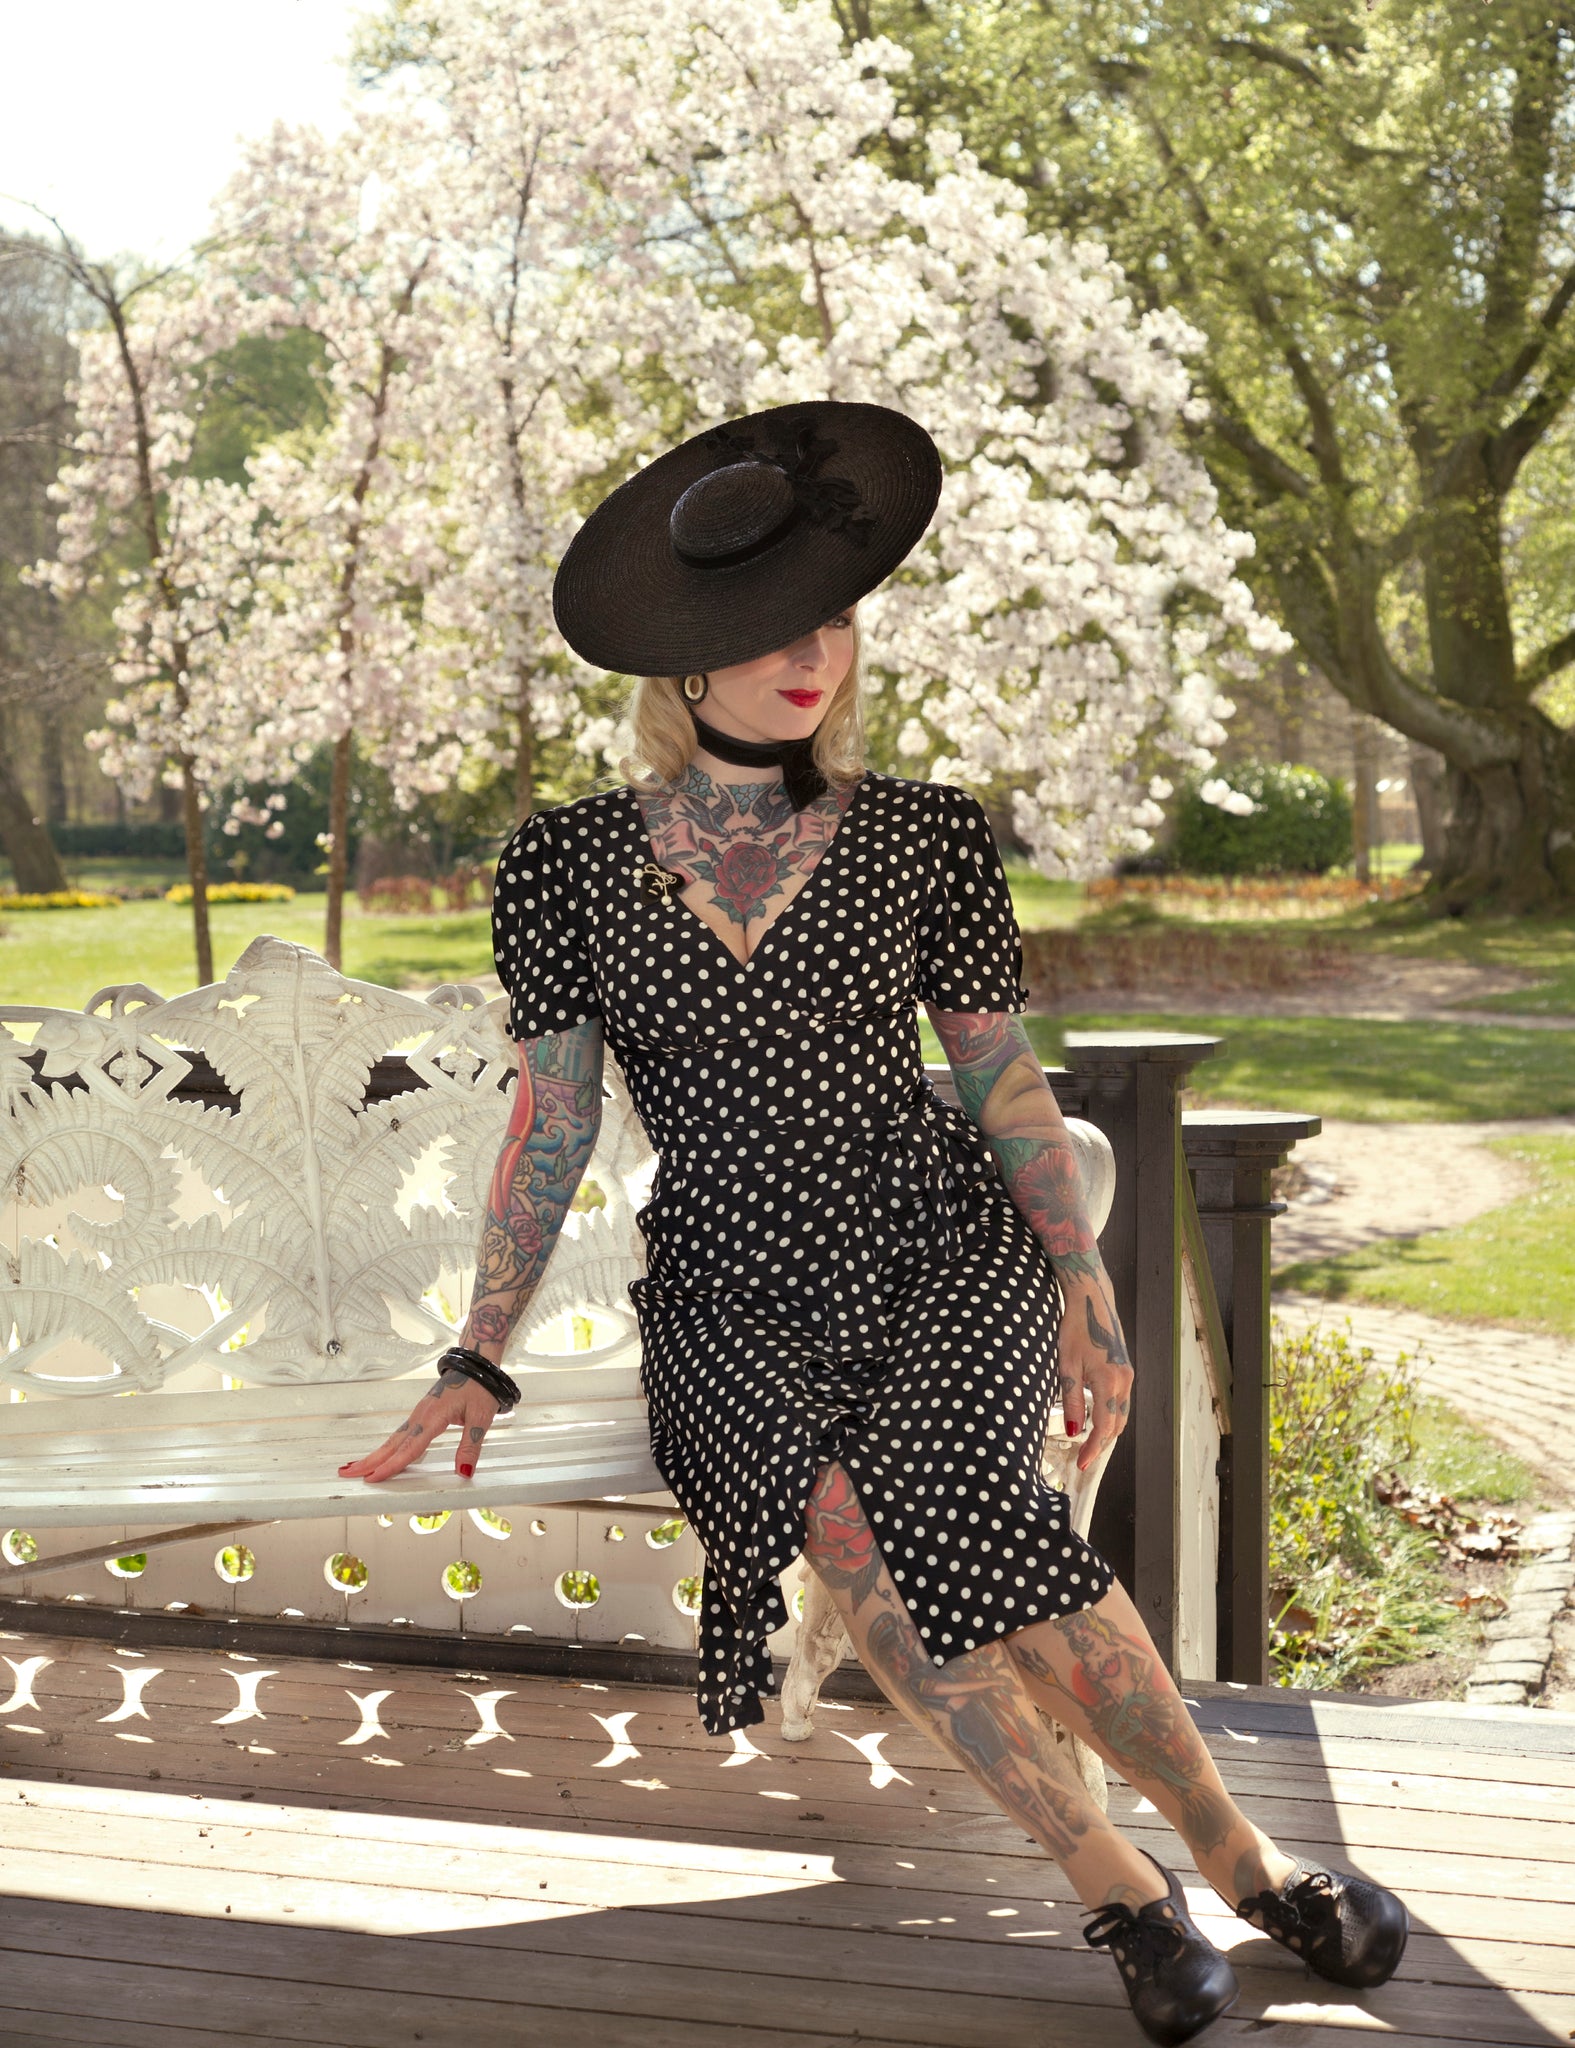 "Lilian" Dress in Black With White Polka dot , Classic & Authentic 1940s Vintage Style - CC41, Goodwood Revival, Twinwood Festival, Viva Las Vegas Rockabilly Weekend Rock n Romance The Seamstress Of Bloomsbury